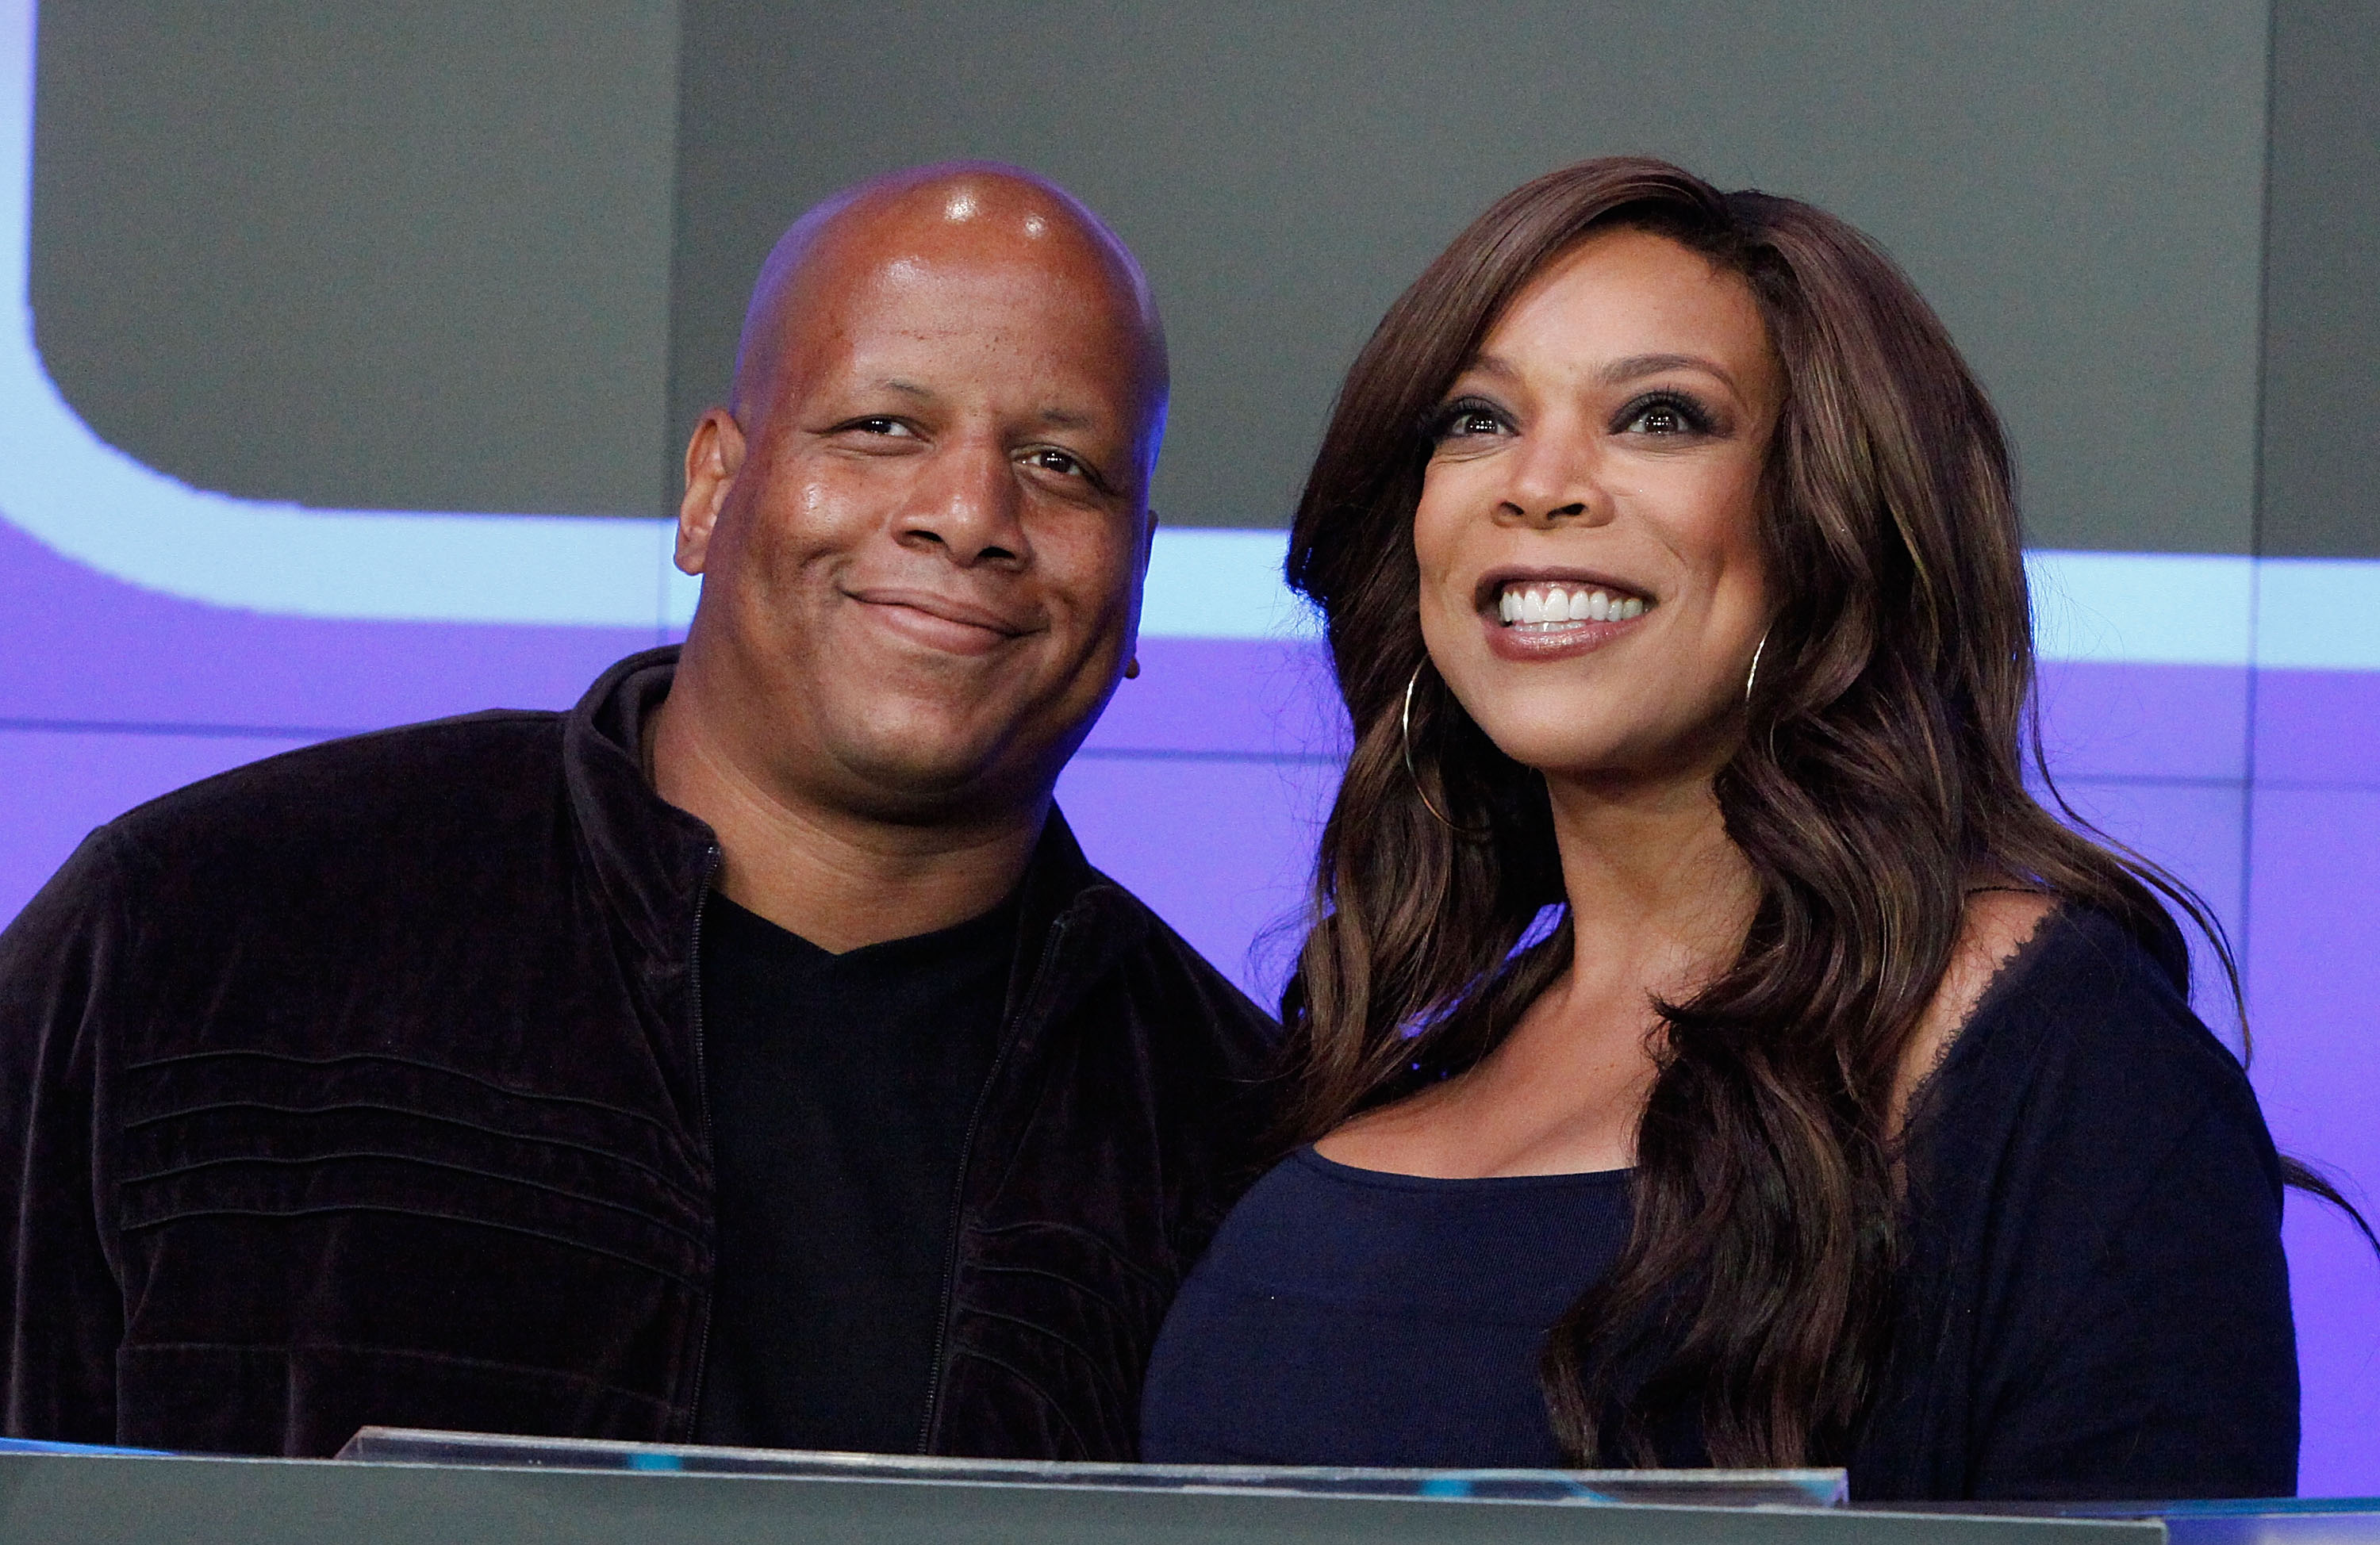 Kevin Hunter and Wendy Williams at the NASDAQ MarketSite on August 25, 2010 in New York City. | Source: Getty Images